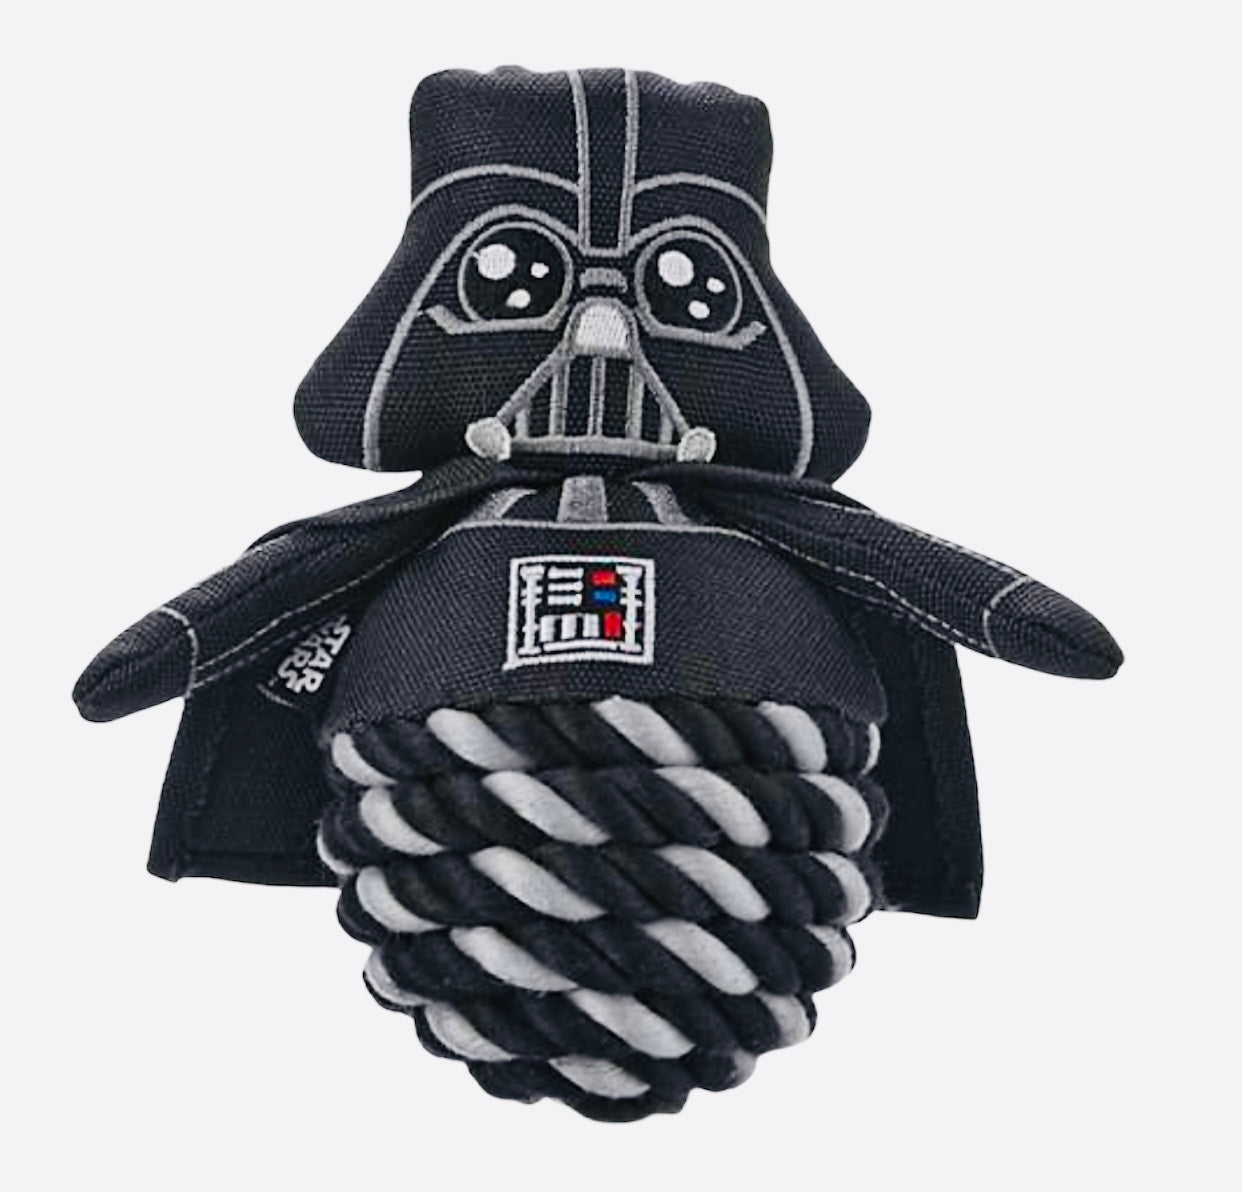 Darth Vader Rope Ball Dog Toy Star Wars Pet Fans Collection